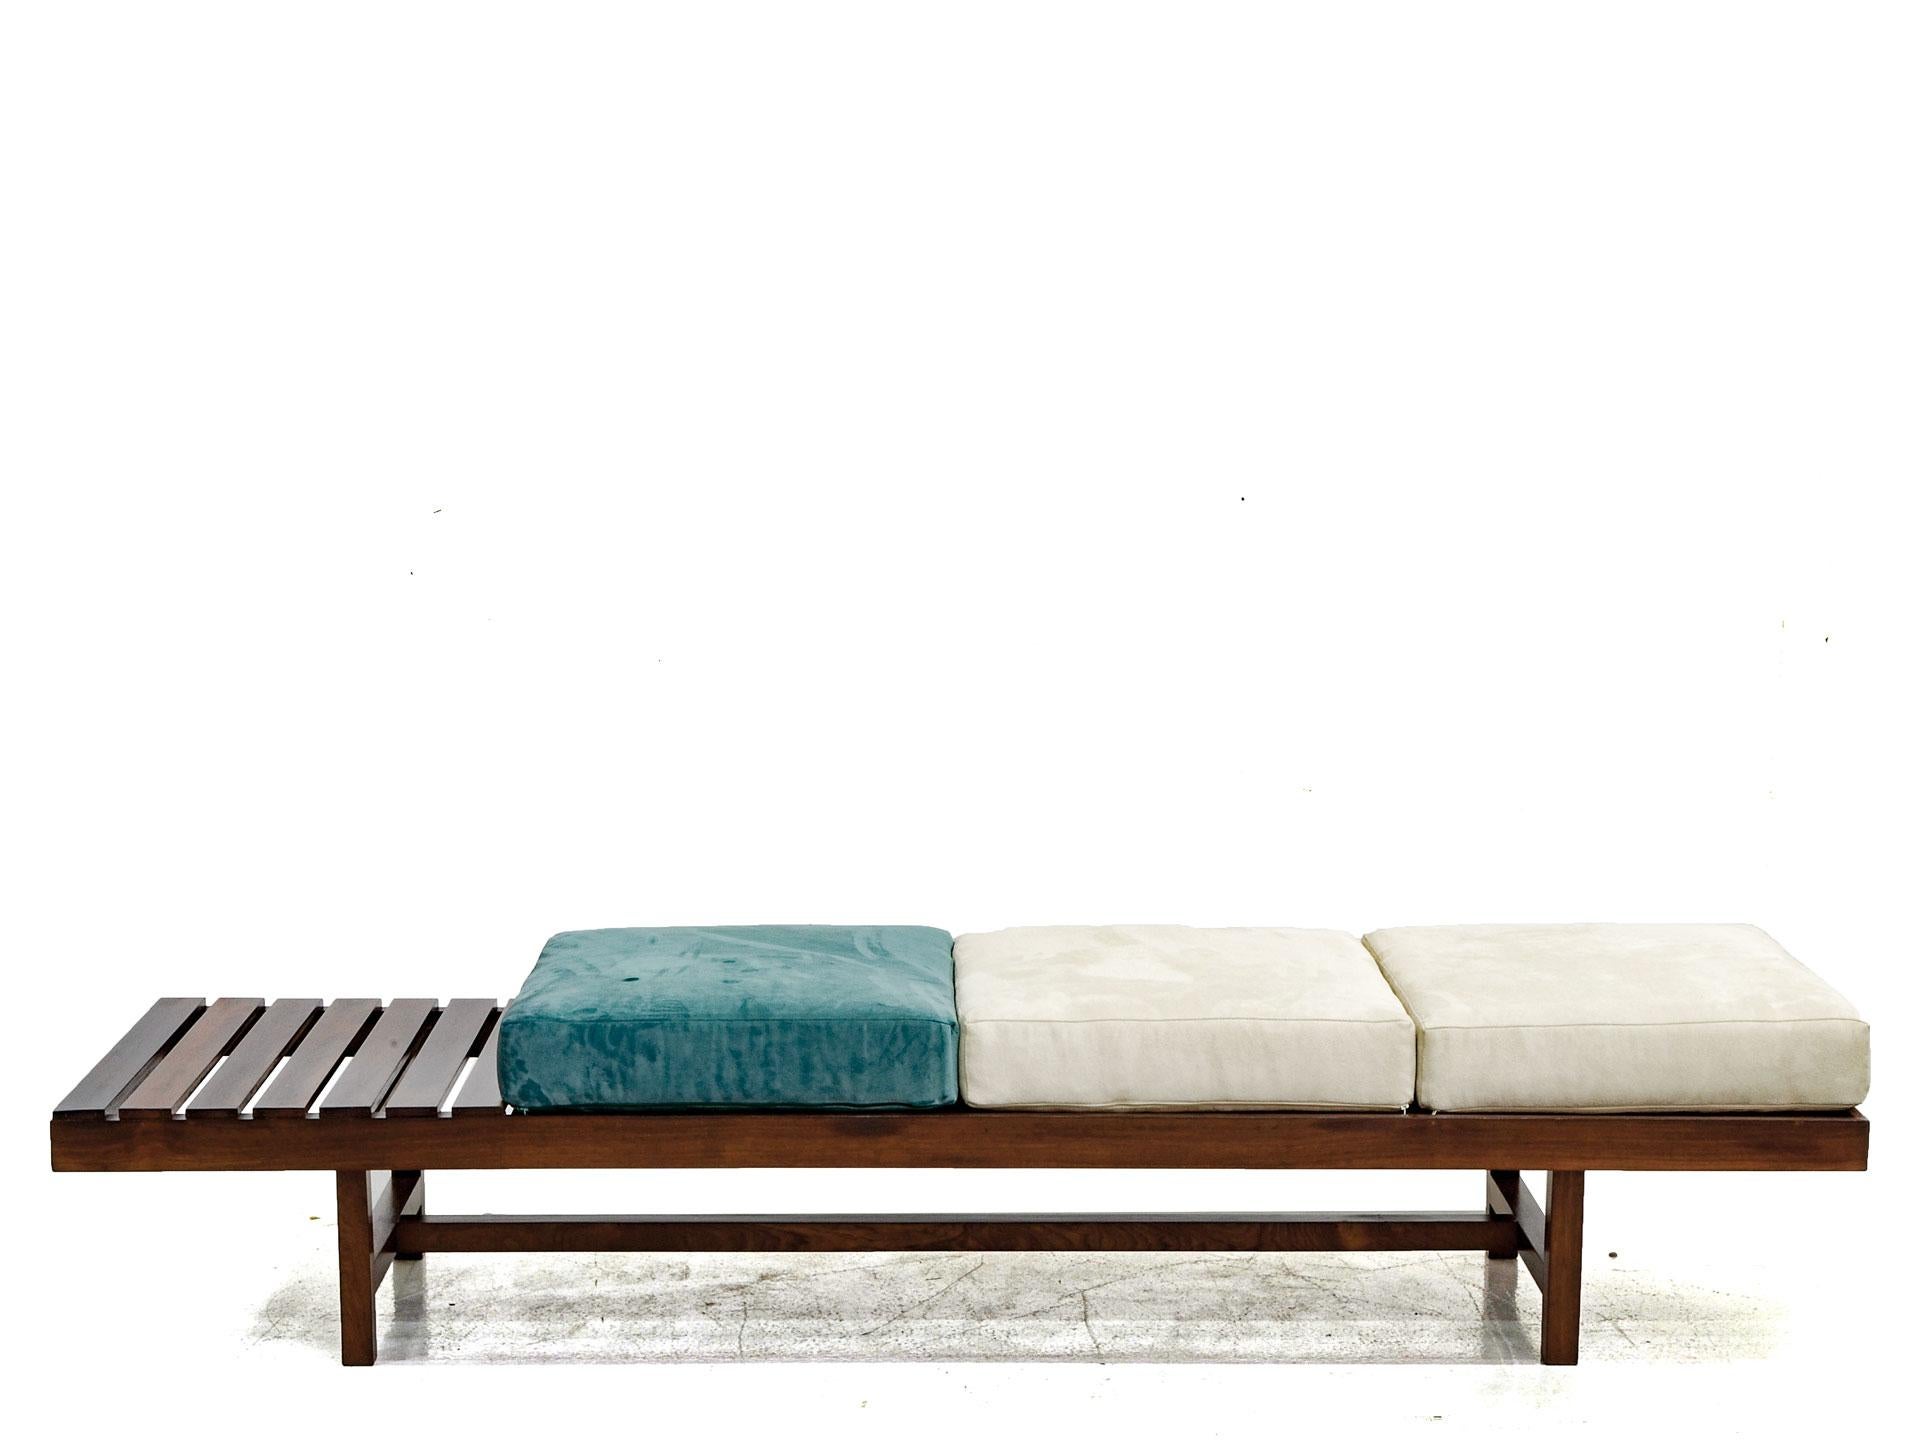 Beautiful and elegant bench in solid jacarandá rosewood by Joaquim Tenreiro. It comfortably accommodates 3 people and has a side space that may be used as a side table. The piece has been completely restored. 

Tenreiro is widely considered the